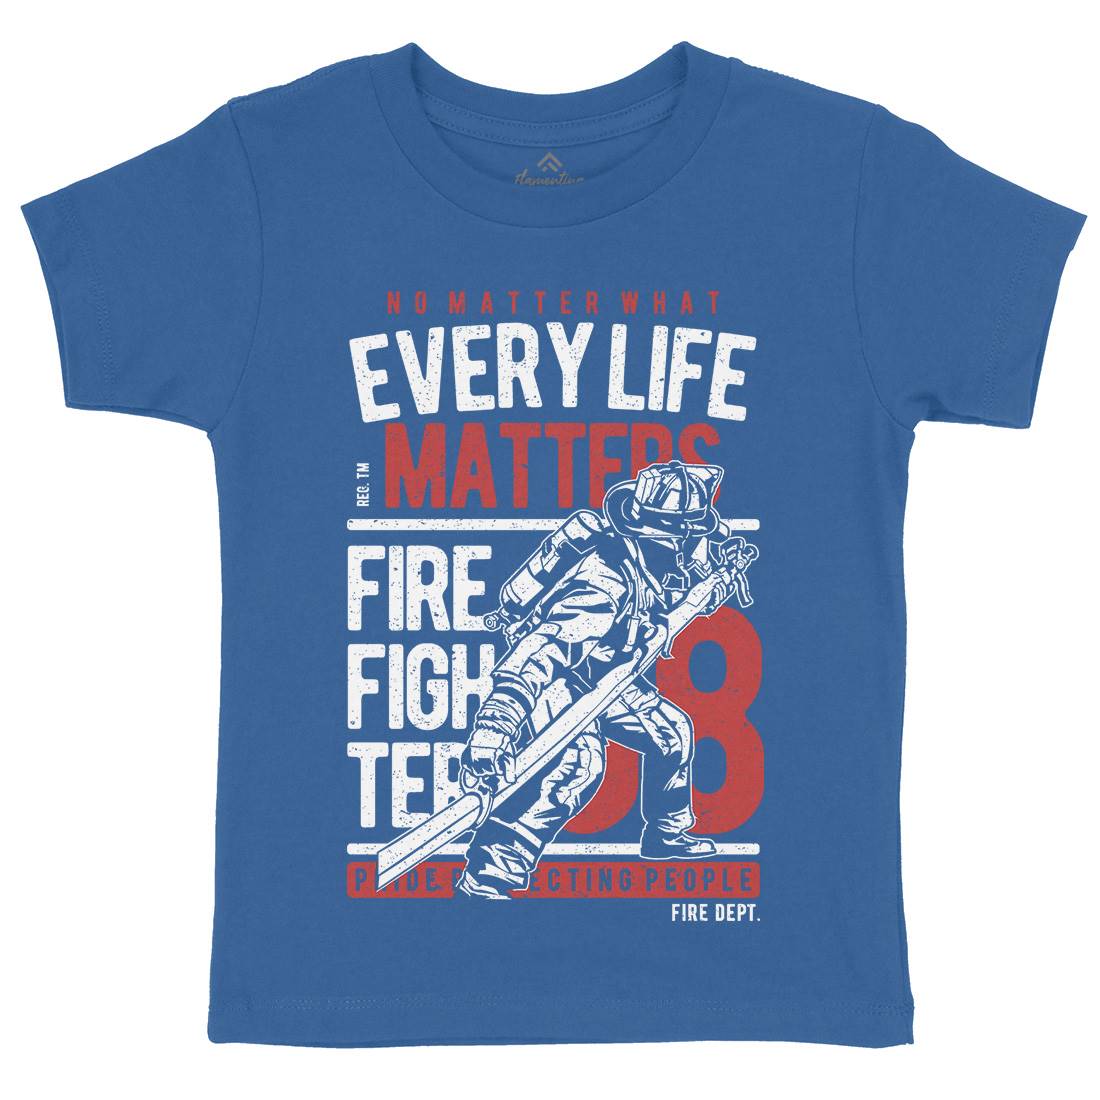 Every Life Matters Kids Crew Neck T-Shirt Firefighters A650